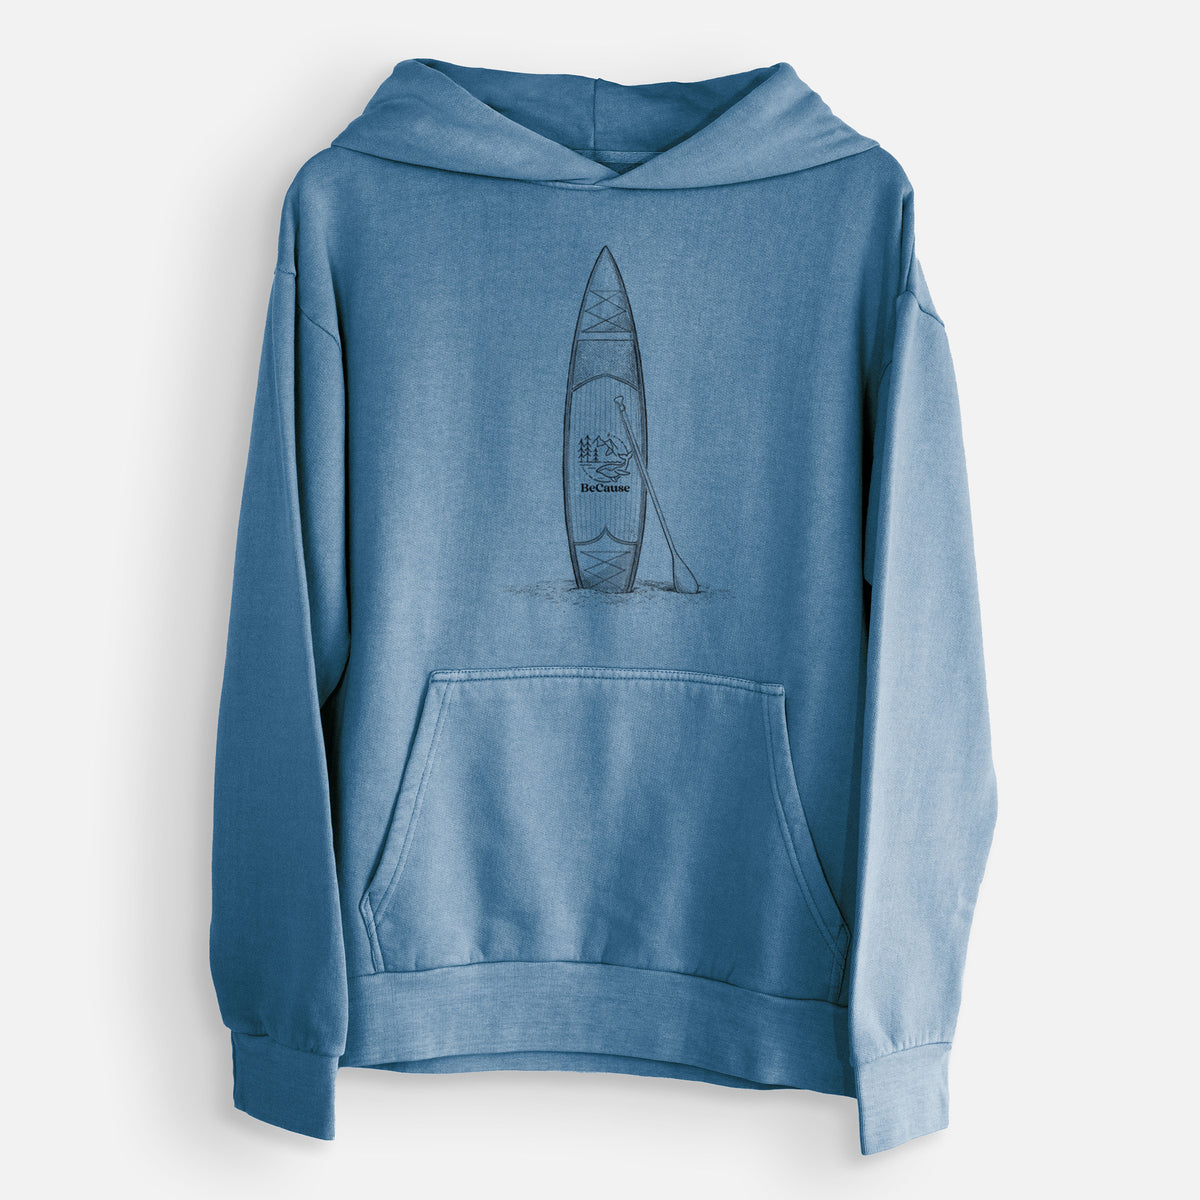 Stand-up Paddle Board  - Urban Heavyweight Hoodie